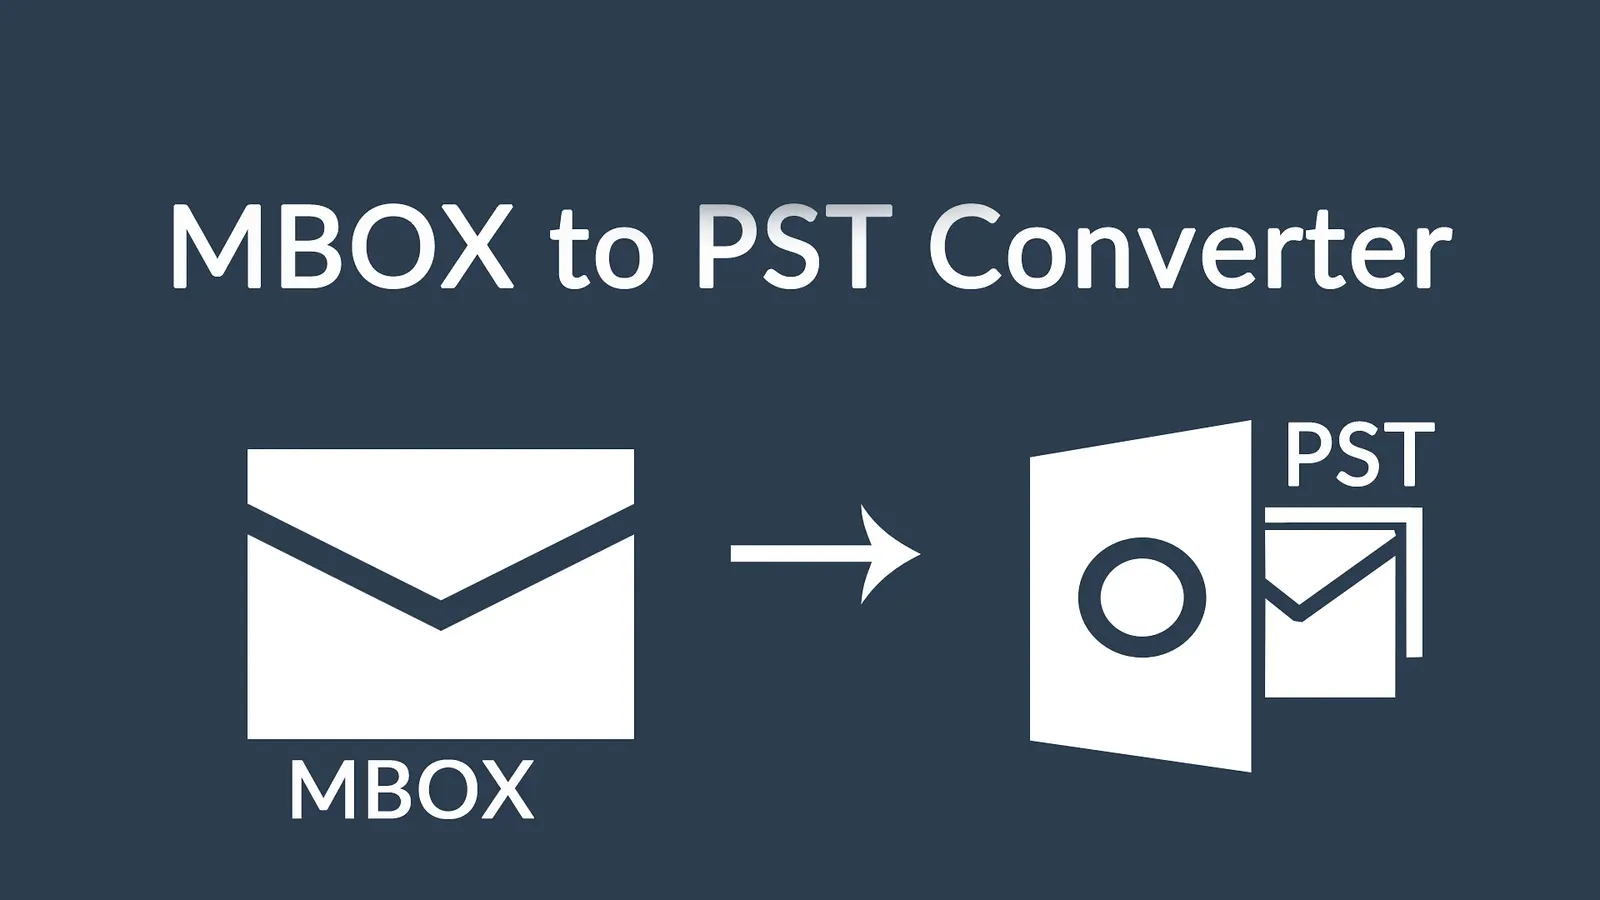 Methods provide alternatives for MBOX to PST conversion